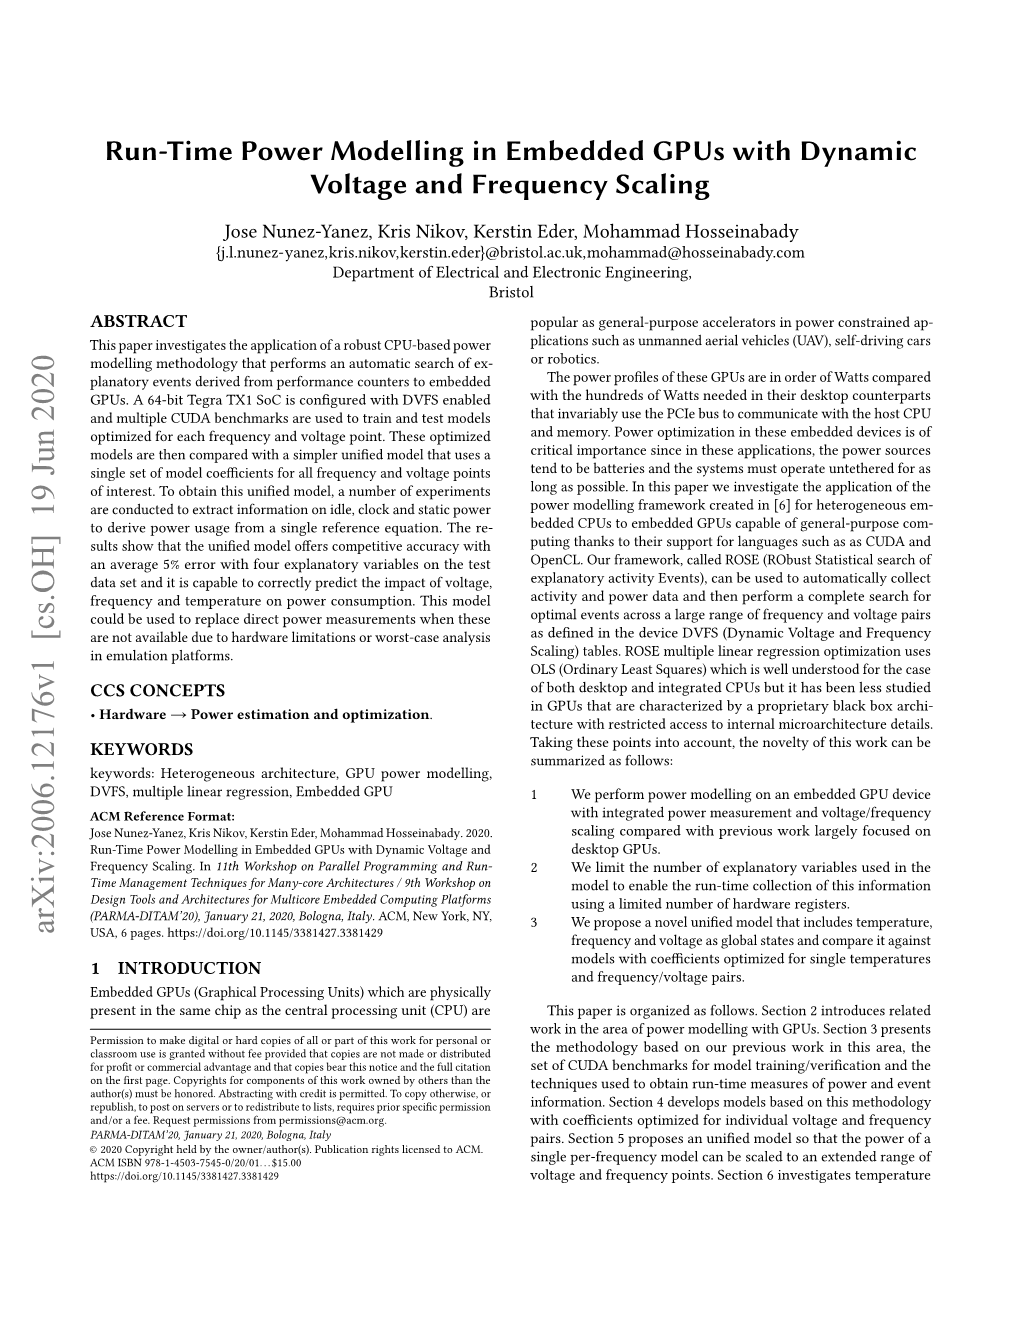 Run-Time Power Modelling in Embedded Gpus with Dynamic Voltage and Frequency Scaling